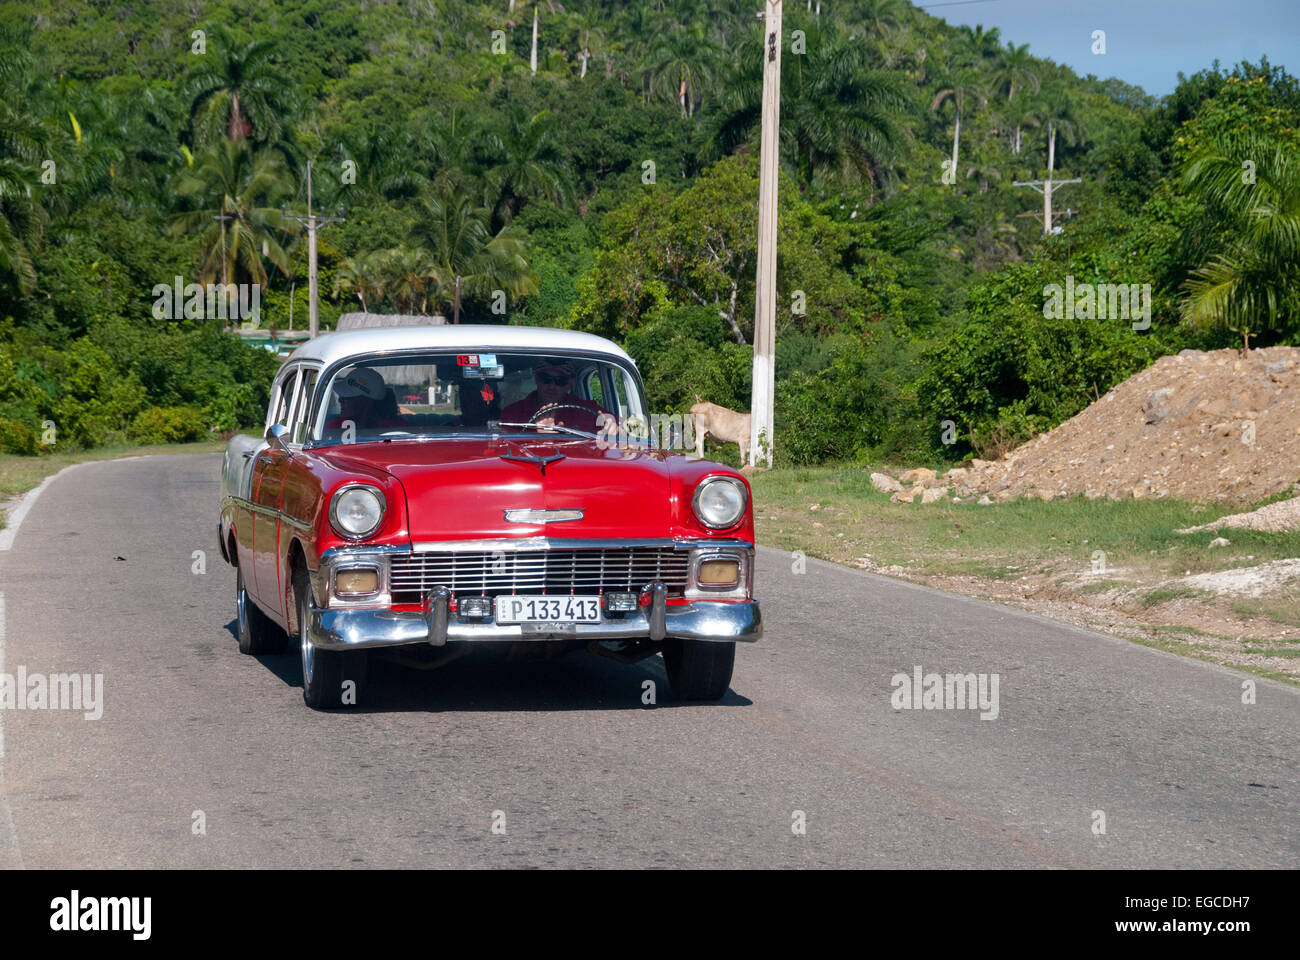 A classic 1955 Chevrolet Bel Air used as a tourist taxi travels on a rural road near Havana Cuba Stock Photo